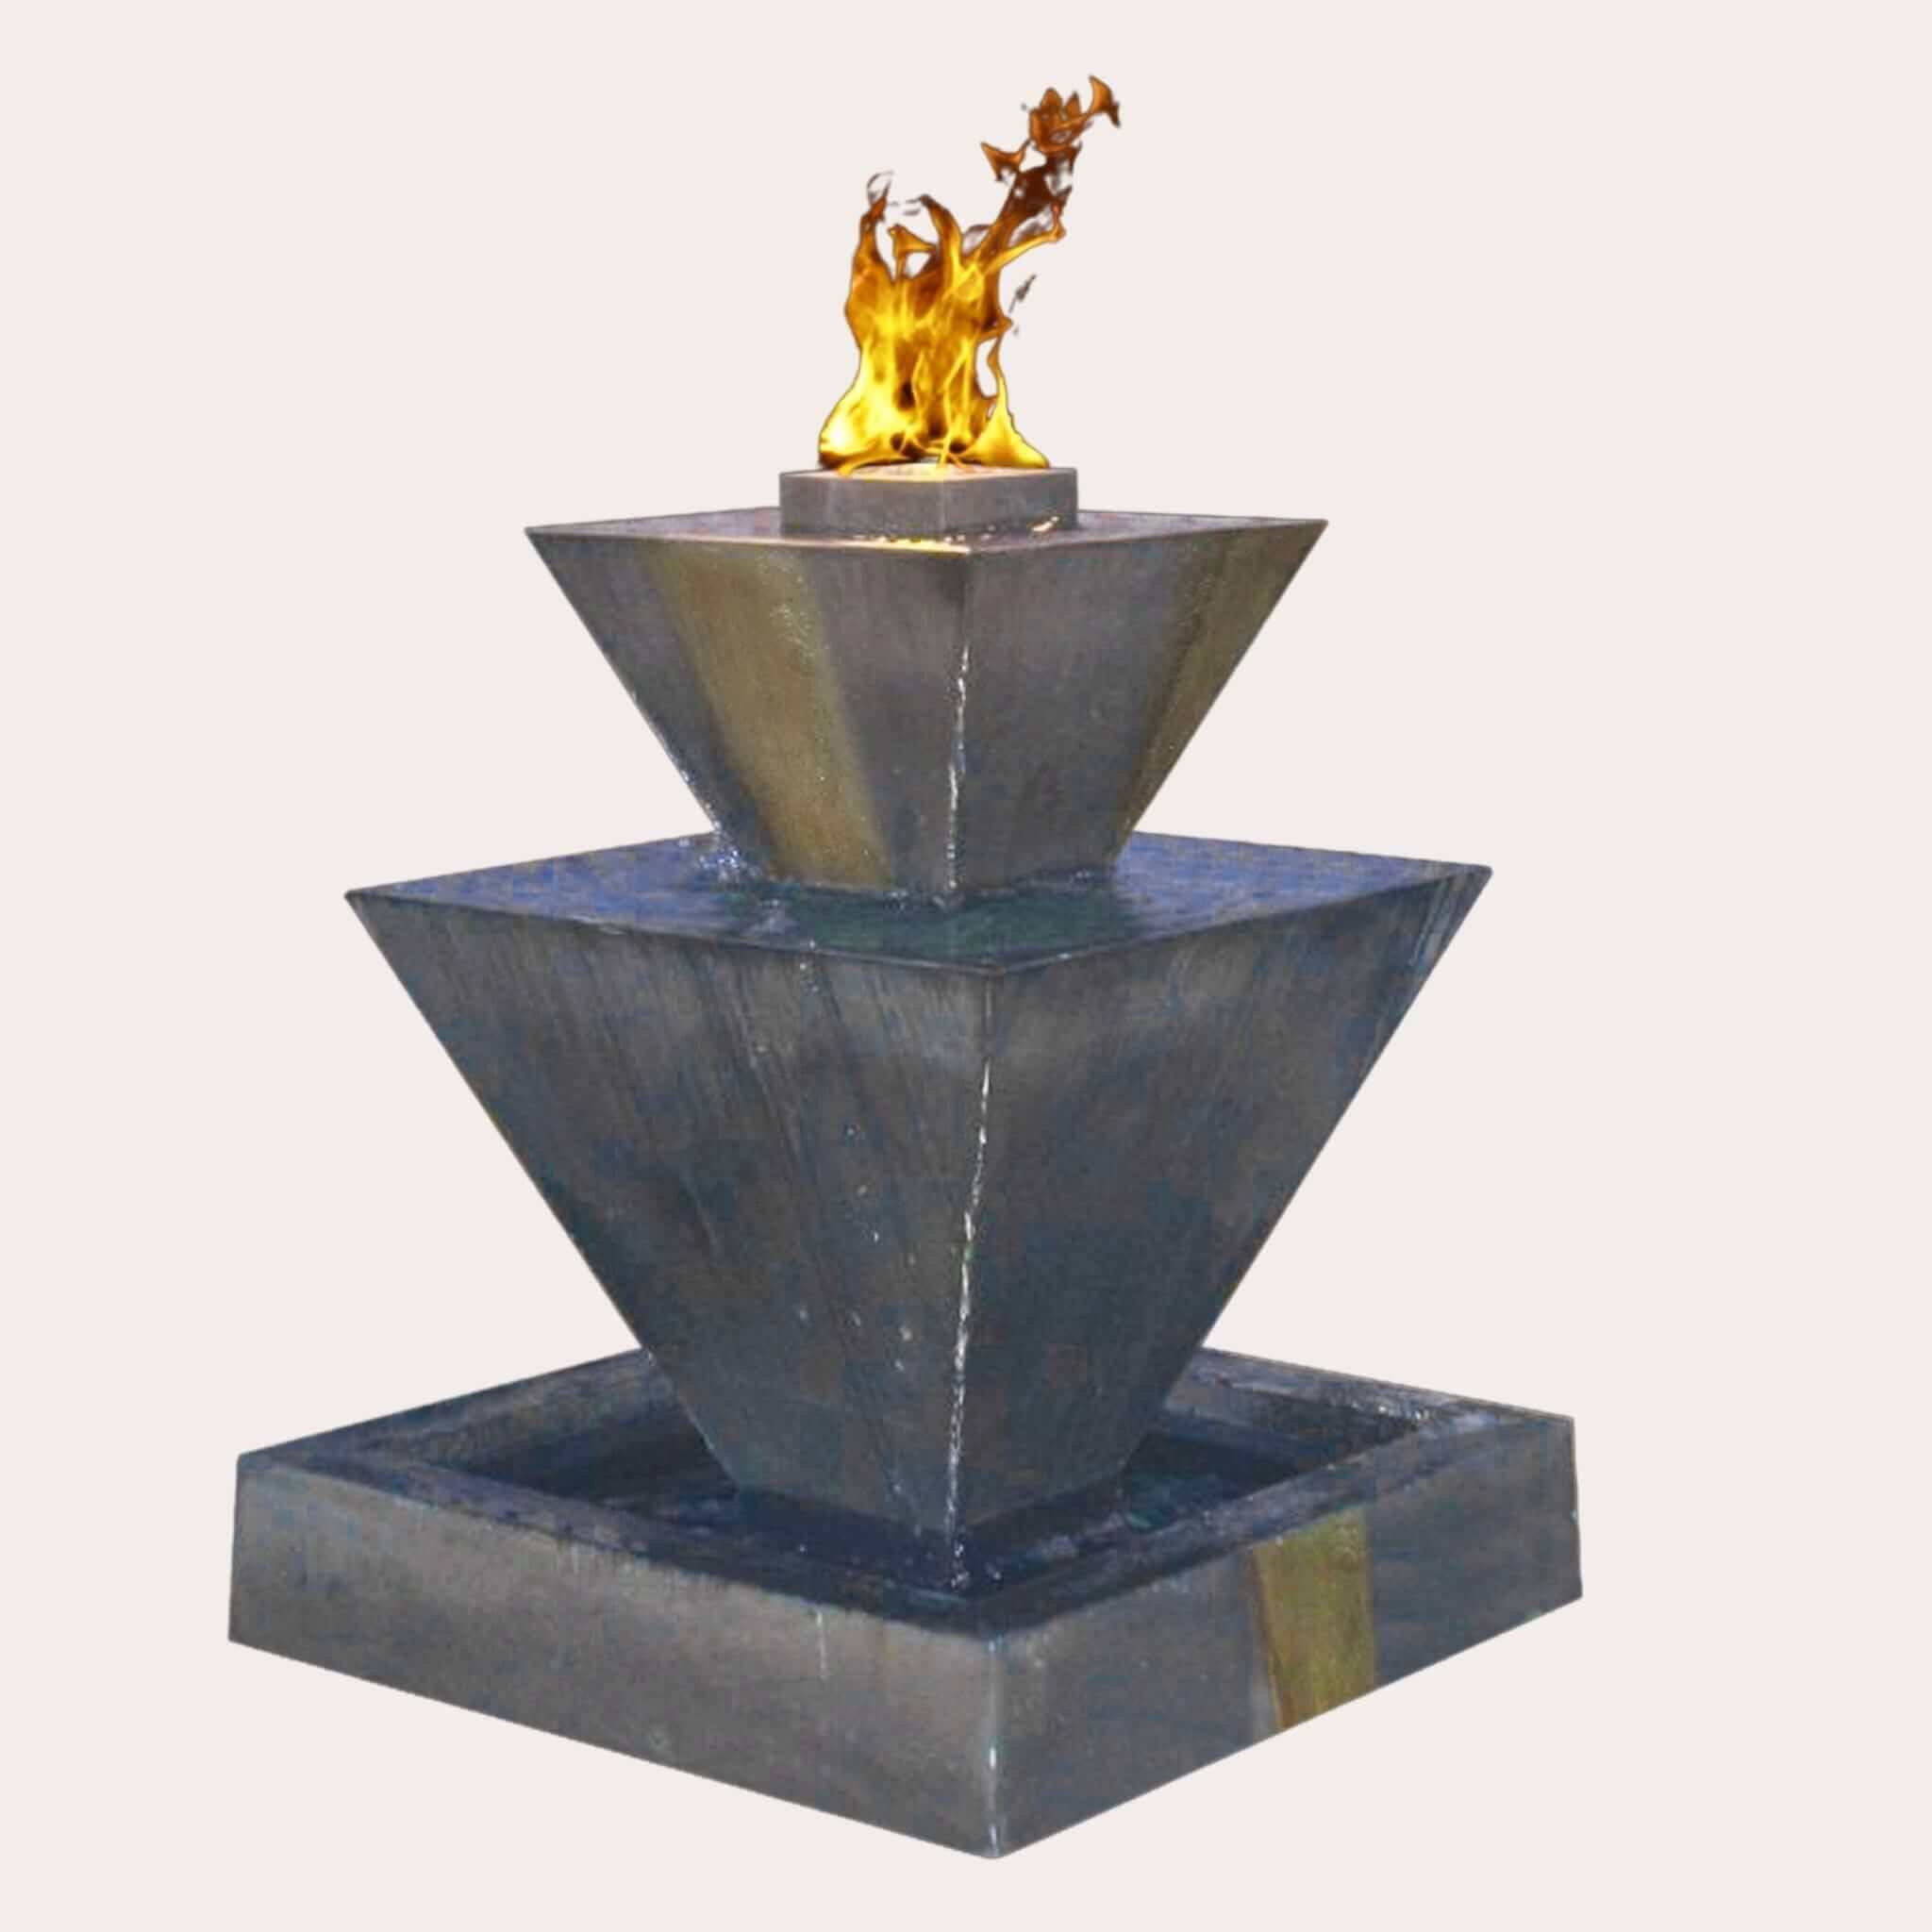 Double Oblique Fire Water Fountain by GIST Fountains